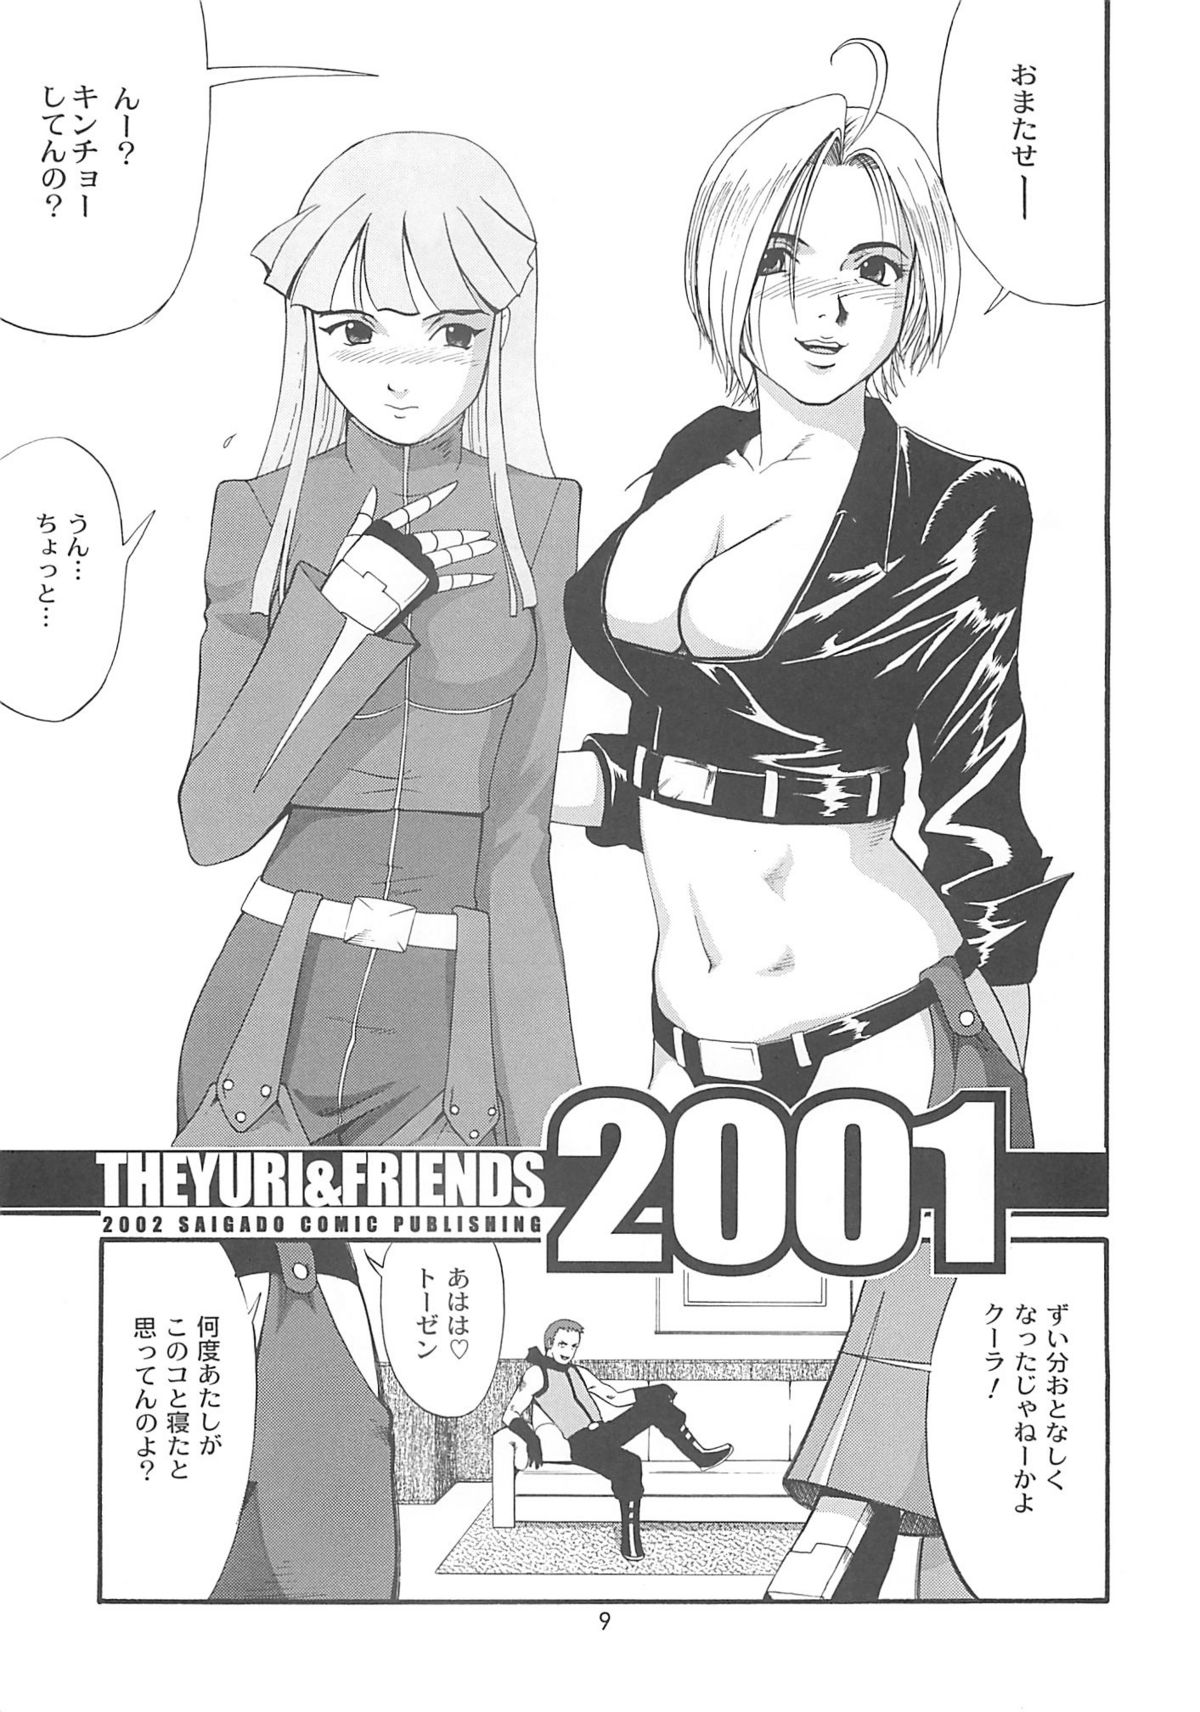 The Yuri & Friends 2001 page 8 full.